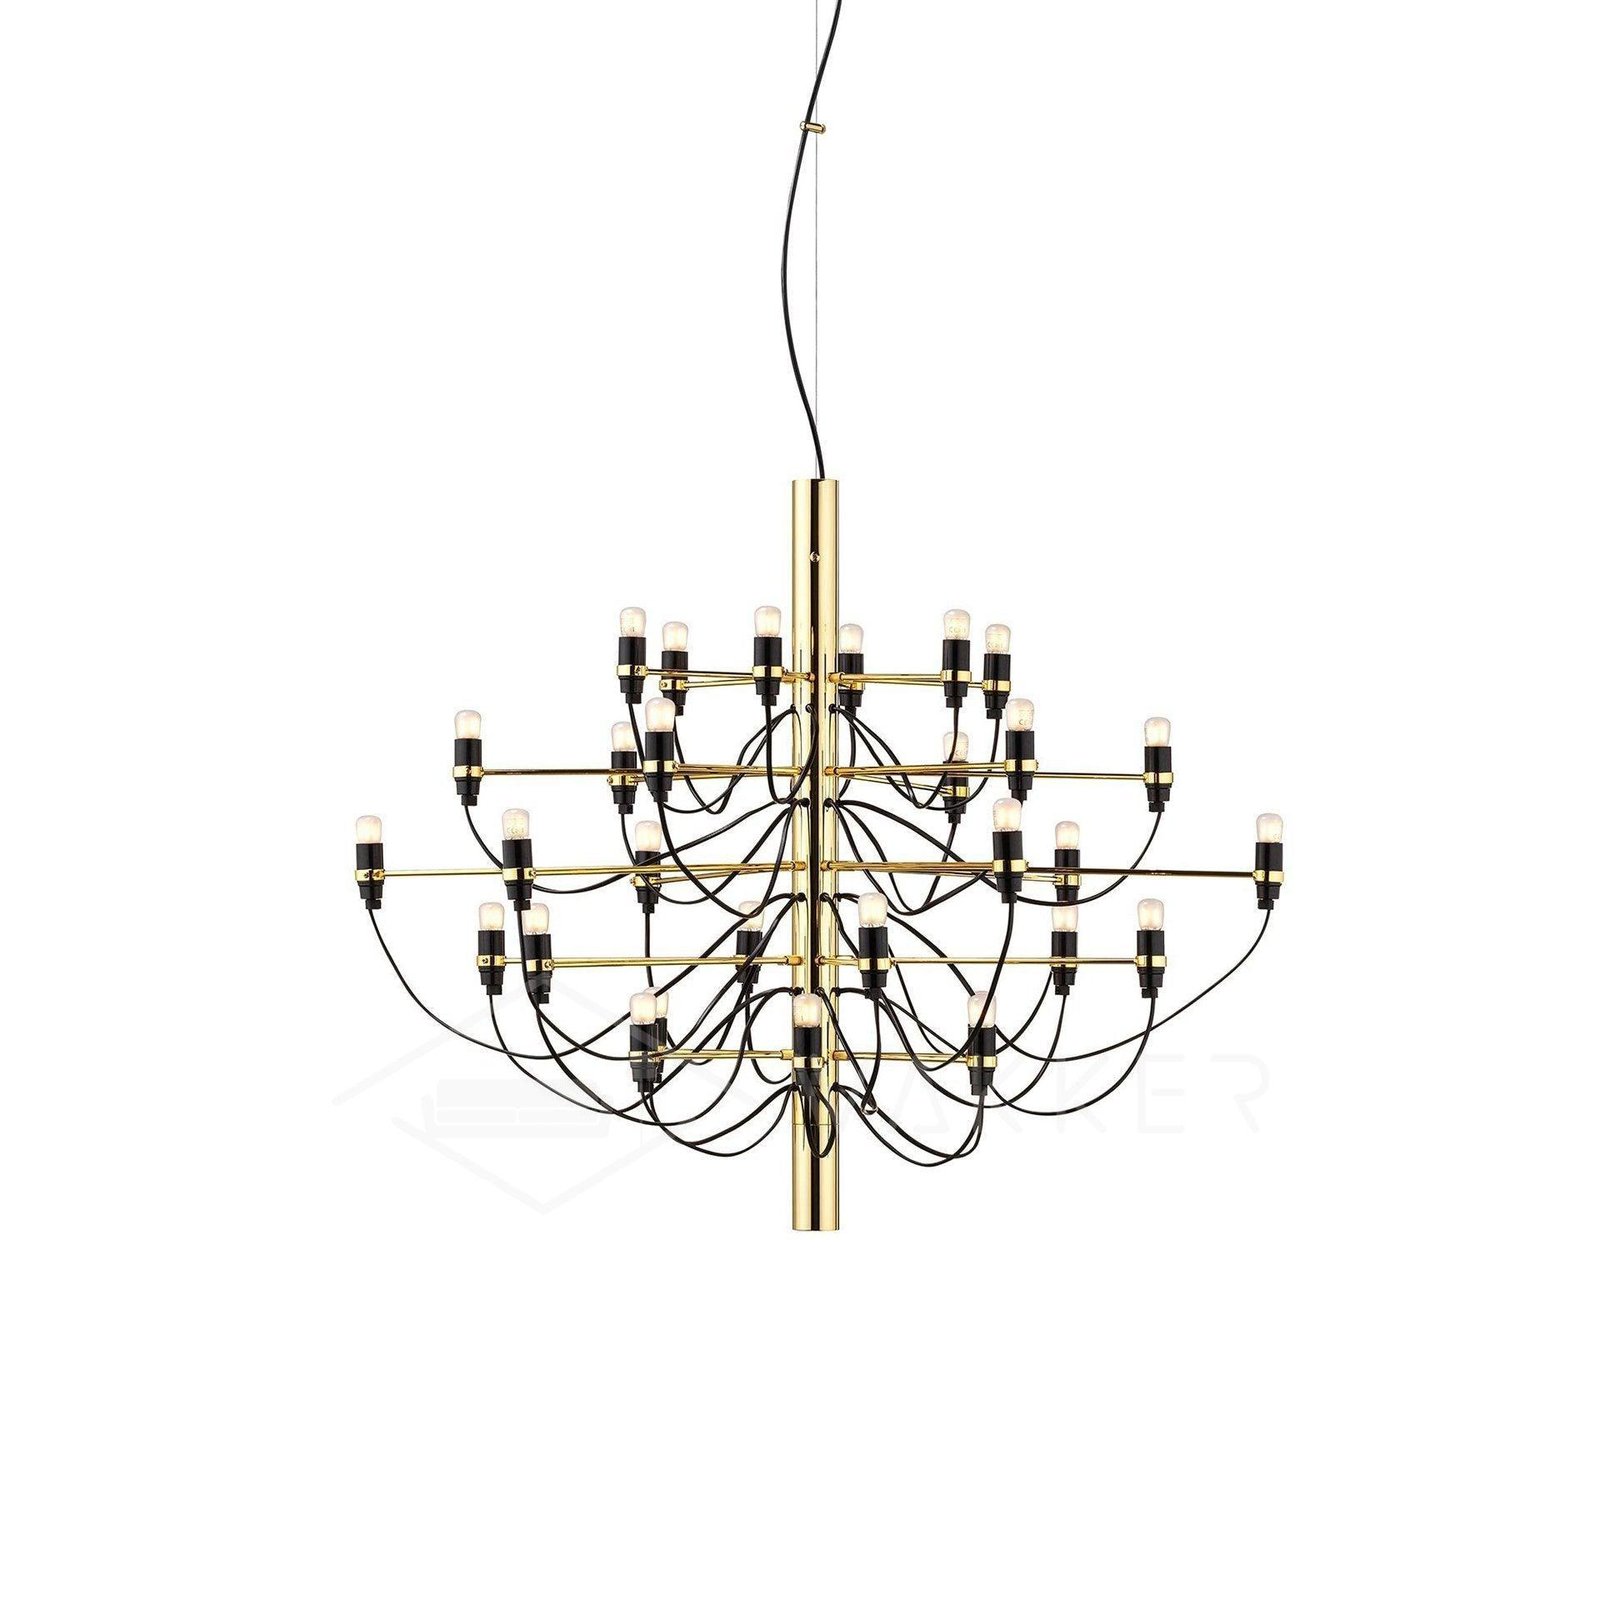 2097 Suspension Lamp 30heads in Gold: Diameter 31.5 inches x Height 23.6 inches (80cm x 60cm)